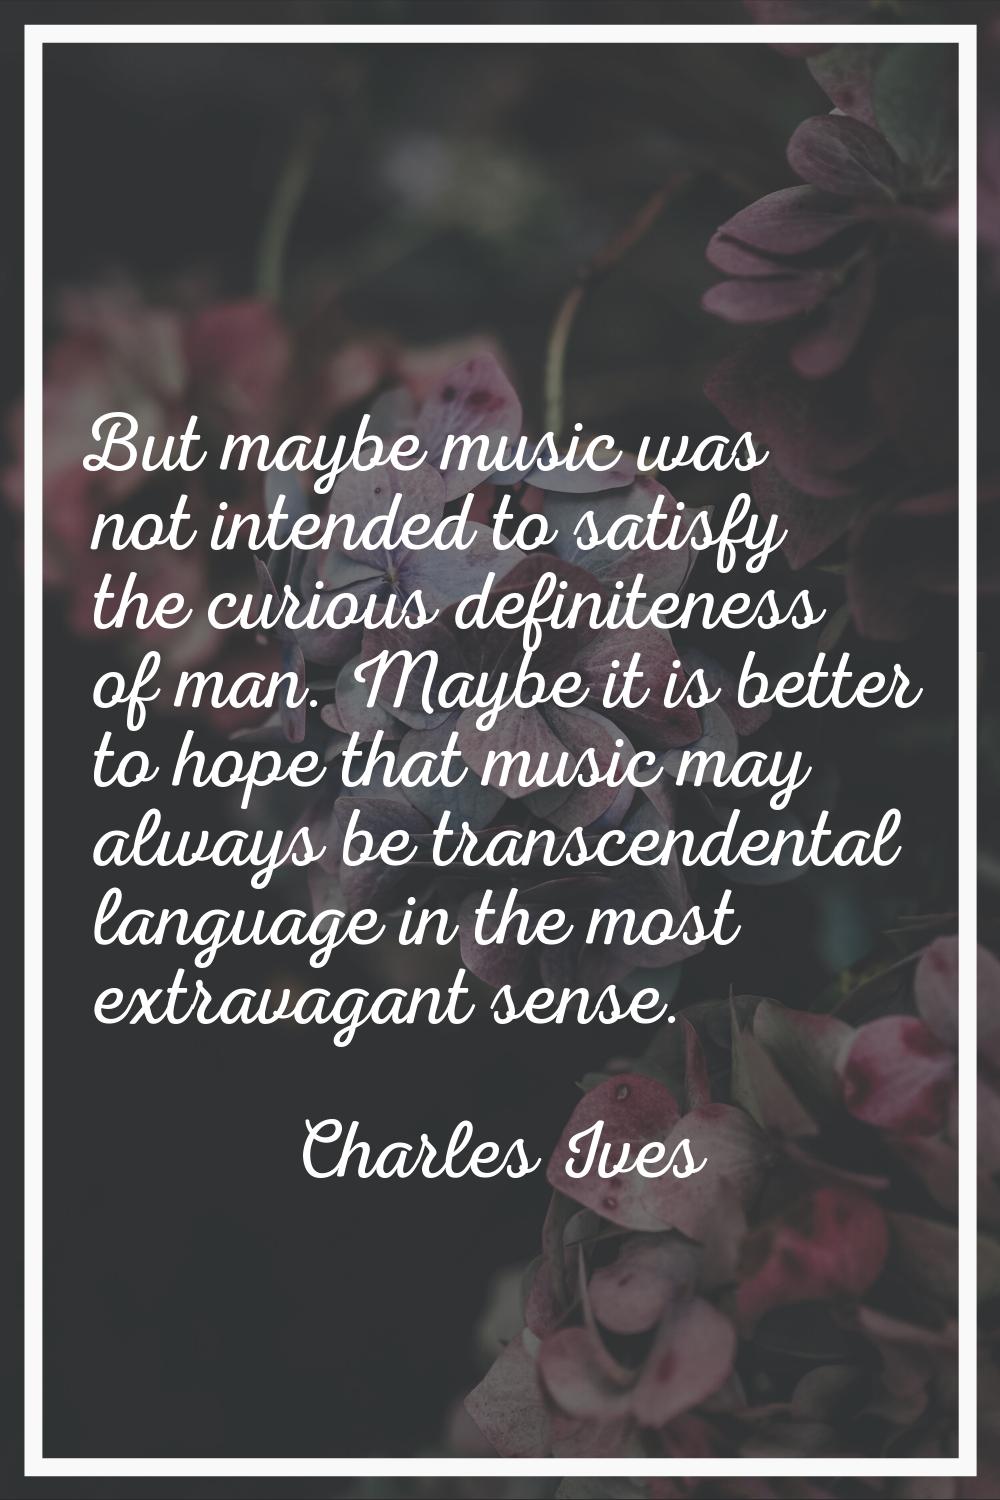 But maybe music was not intended to satisfy the curious definiteness of man. Maybe it is better to 